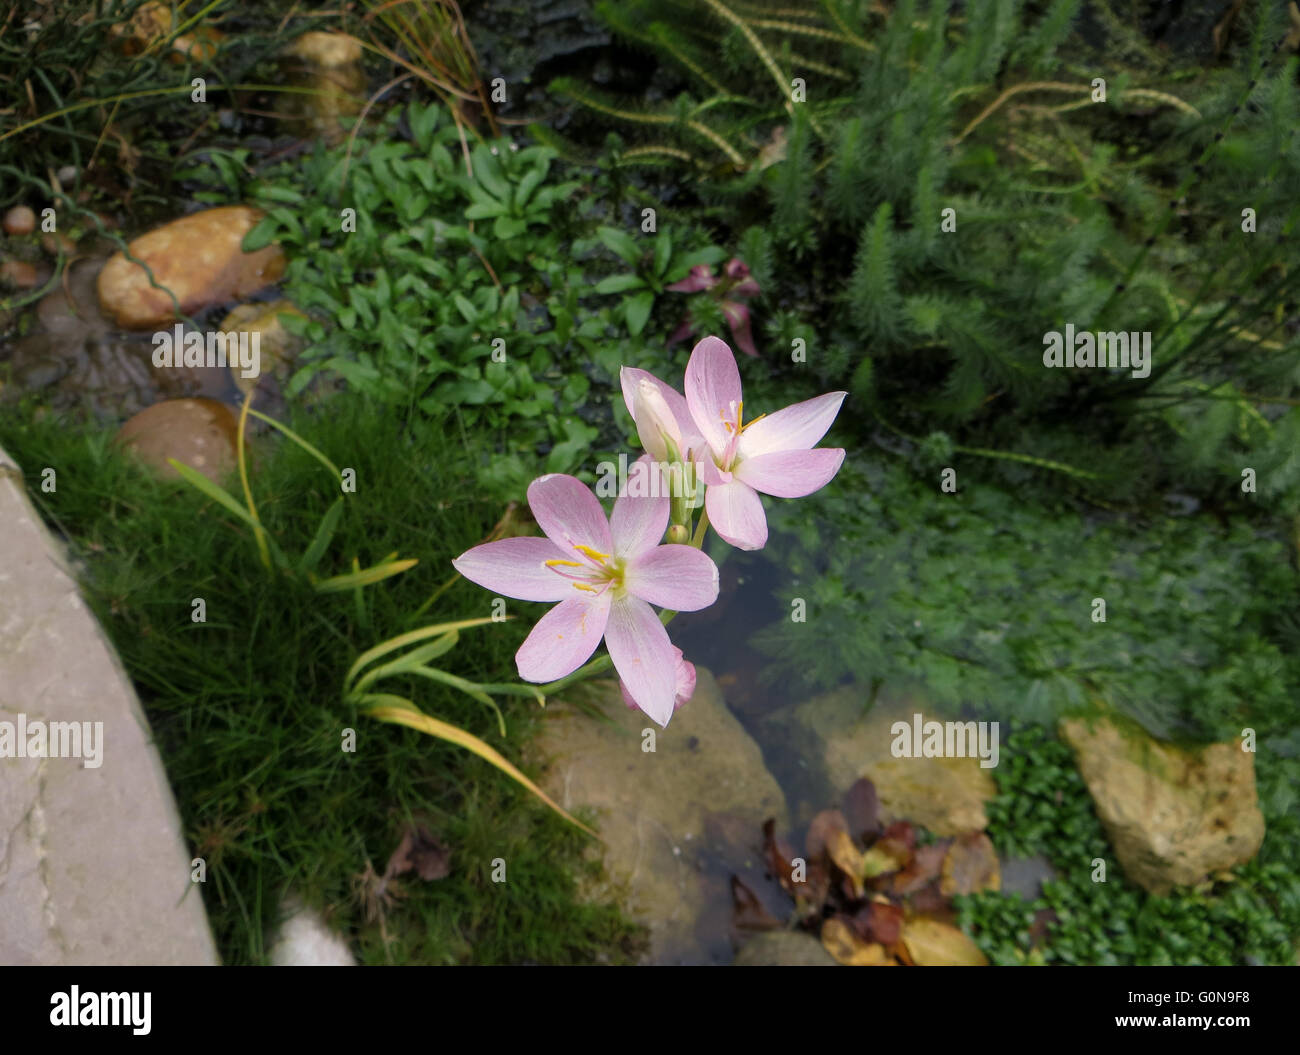 Pink schizostylis (Schizostylis coccinea) in flower at margin of garden pond with rocks, pebbles and greenery Stock Photo